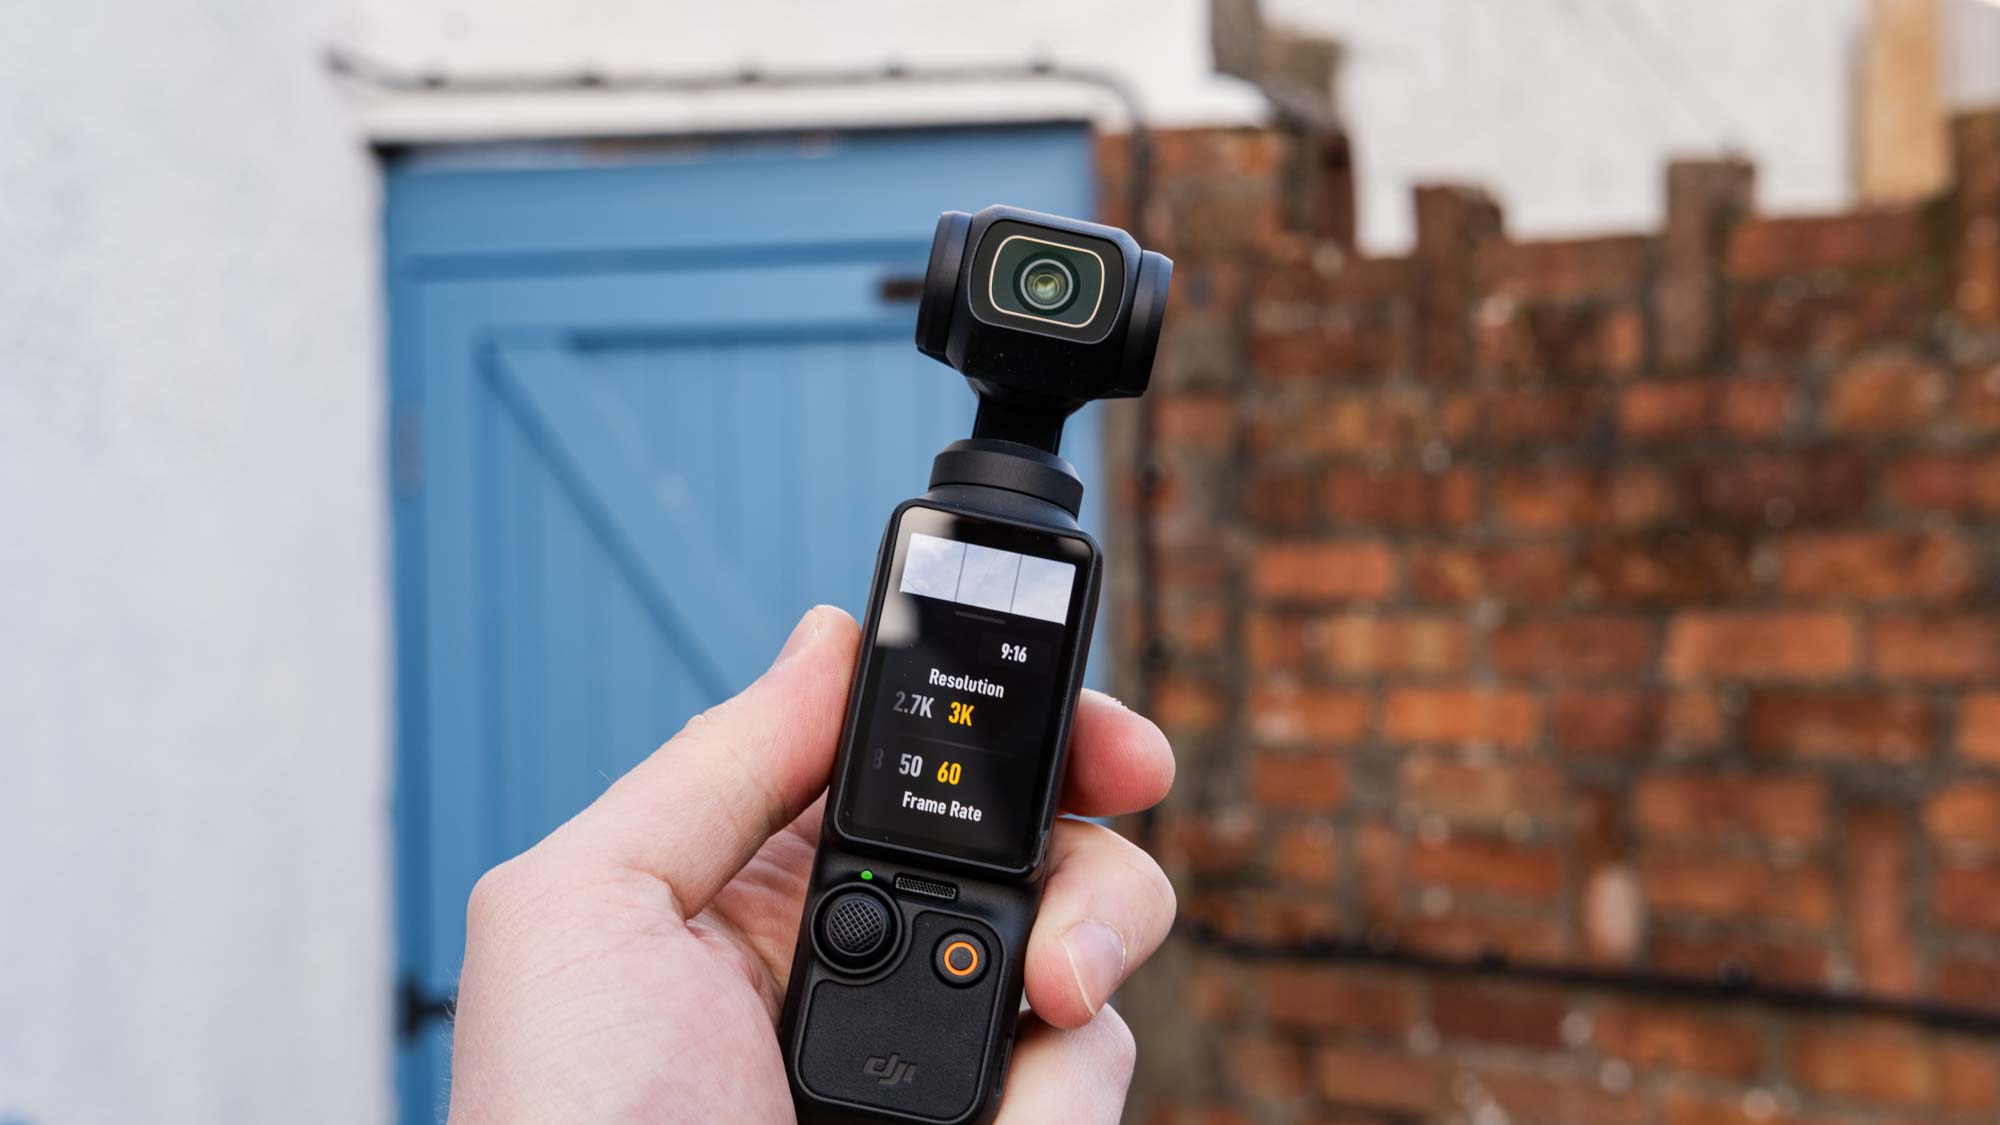 10 More Tips For The DJI Osmo Pocket 3 Camera - Part II